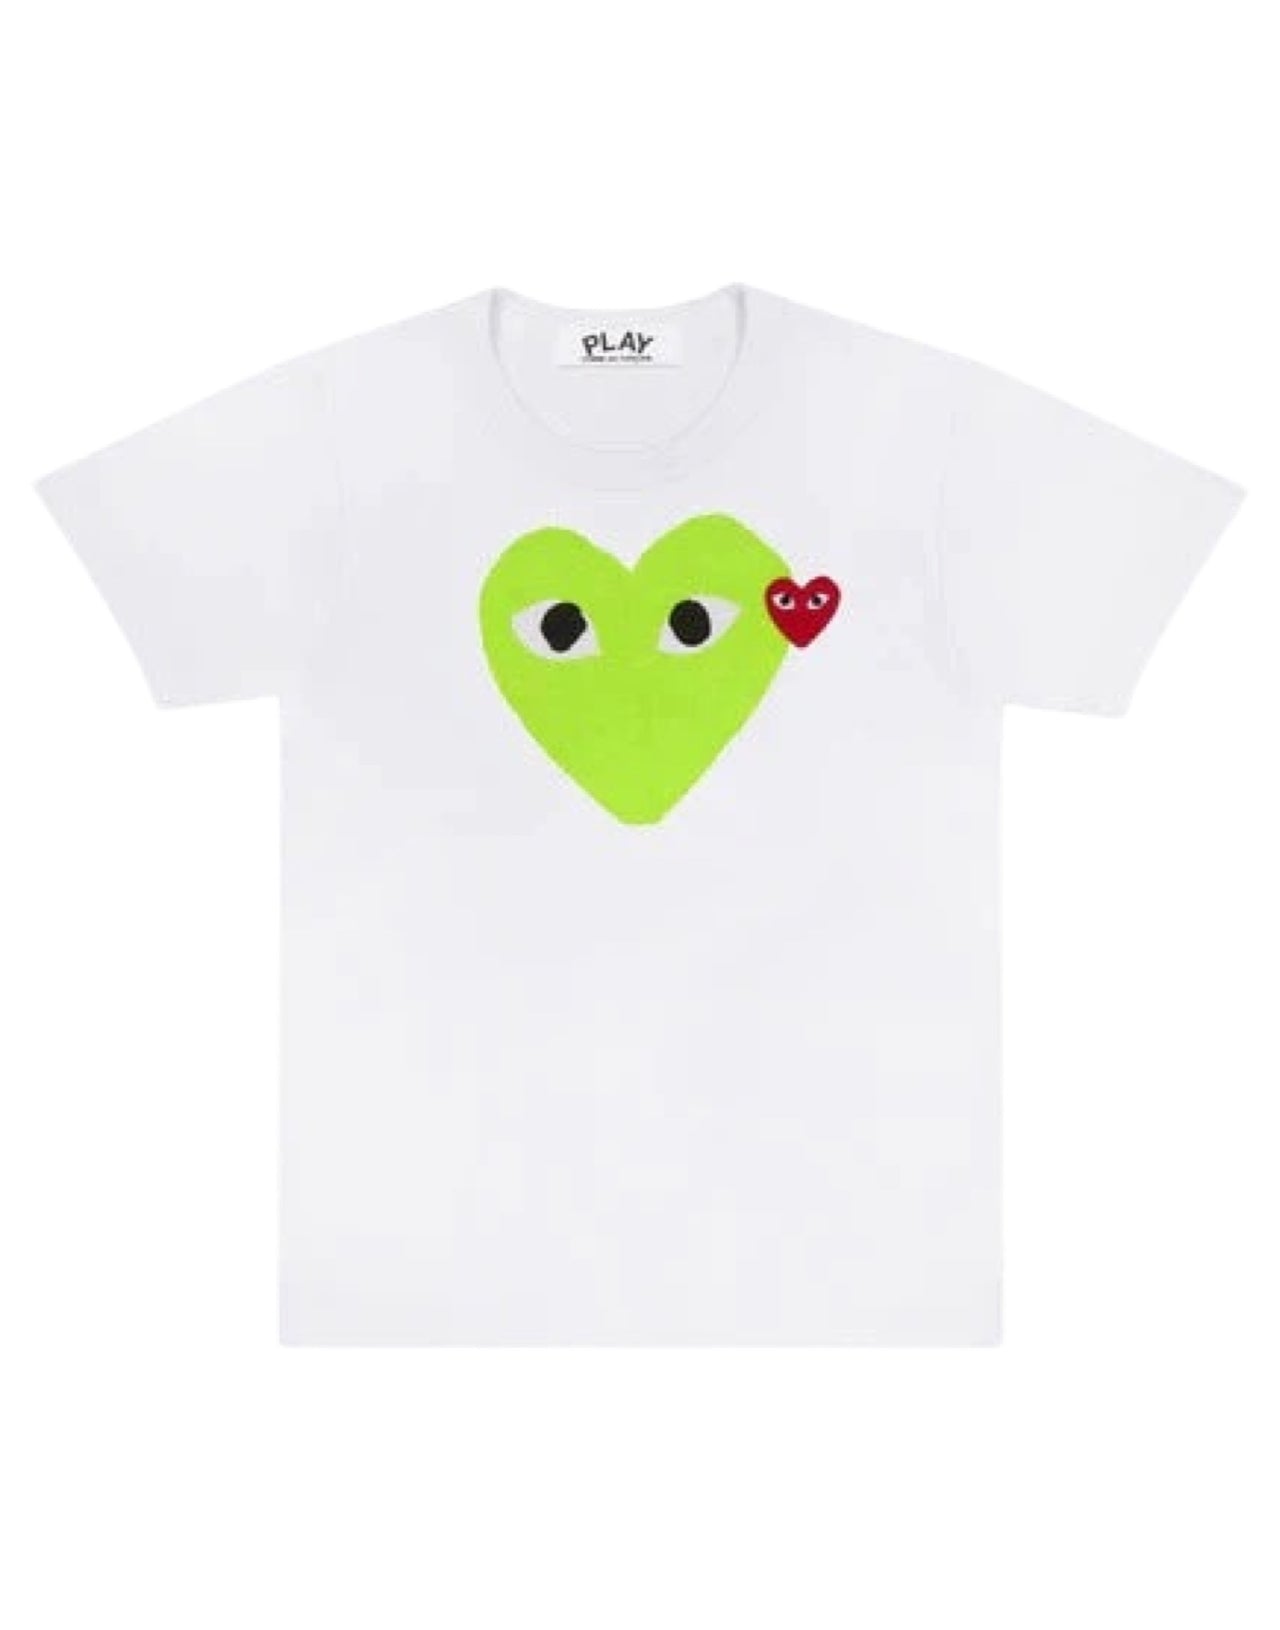 CDG PLAY T-shirt Cuore Lime Bianca